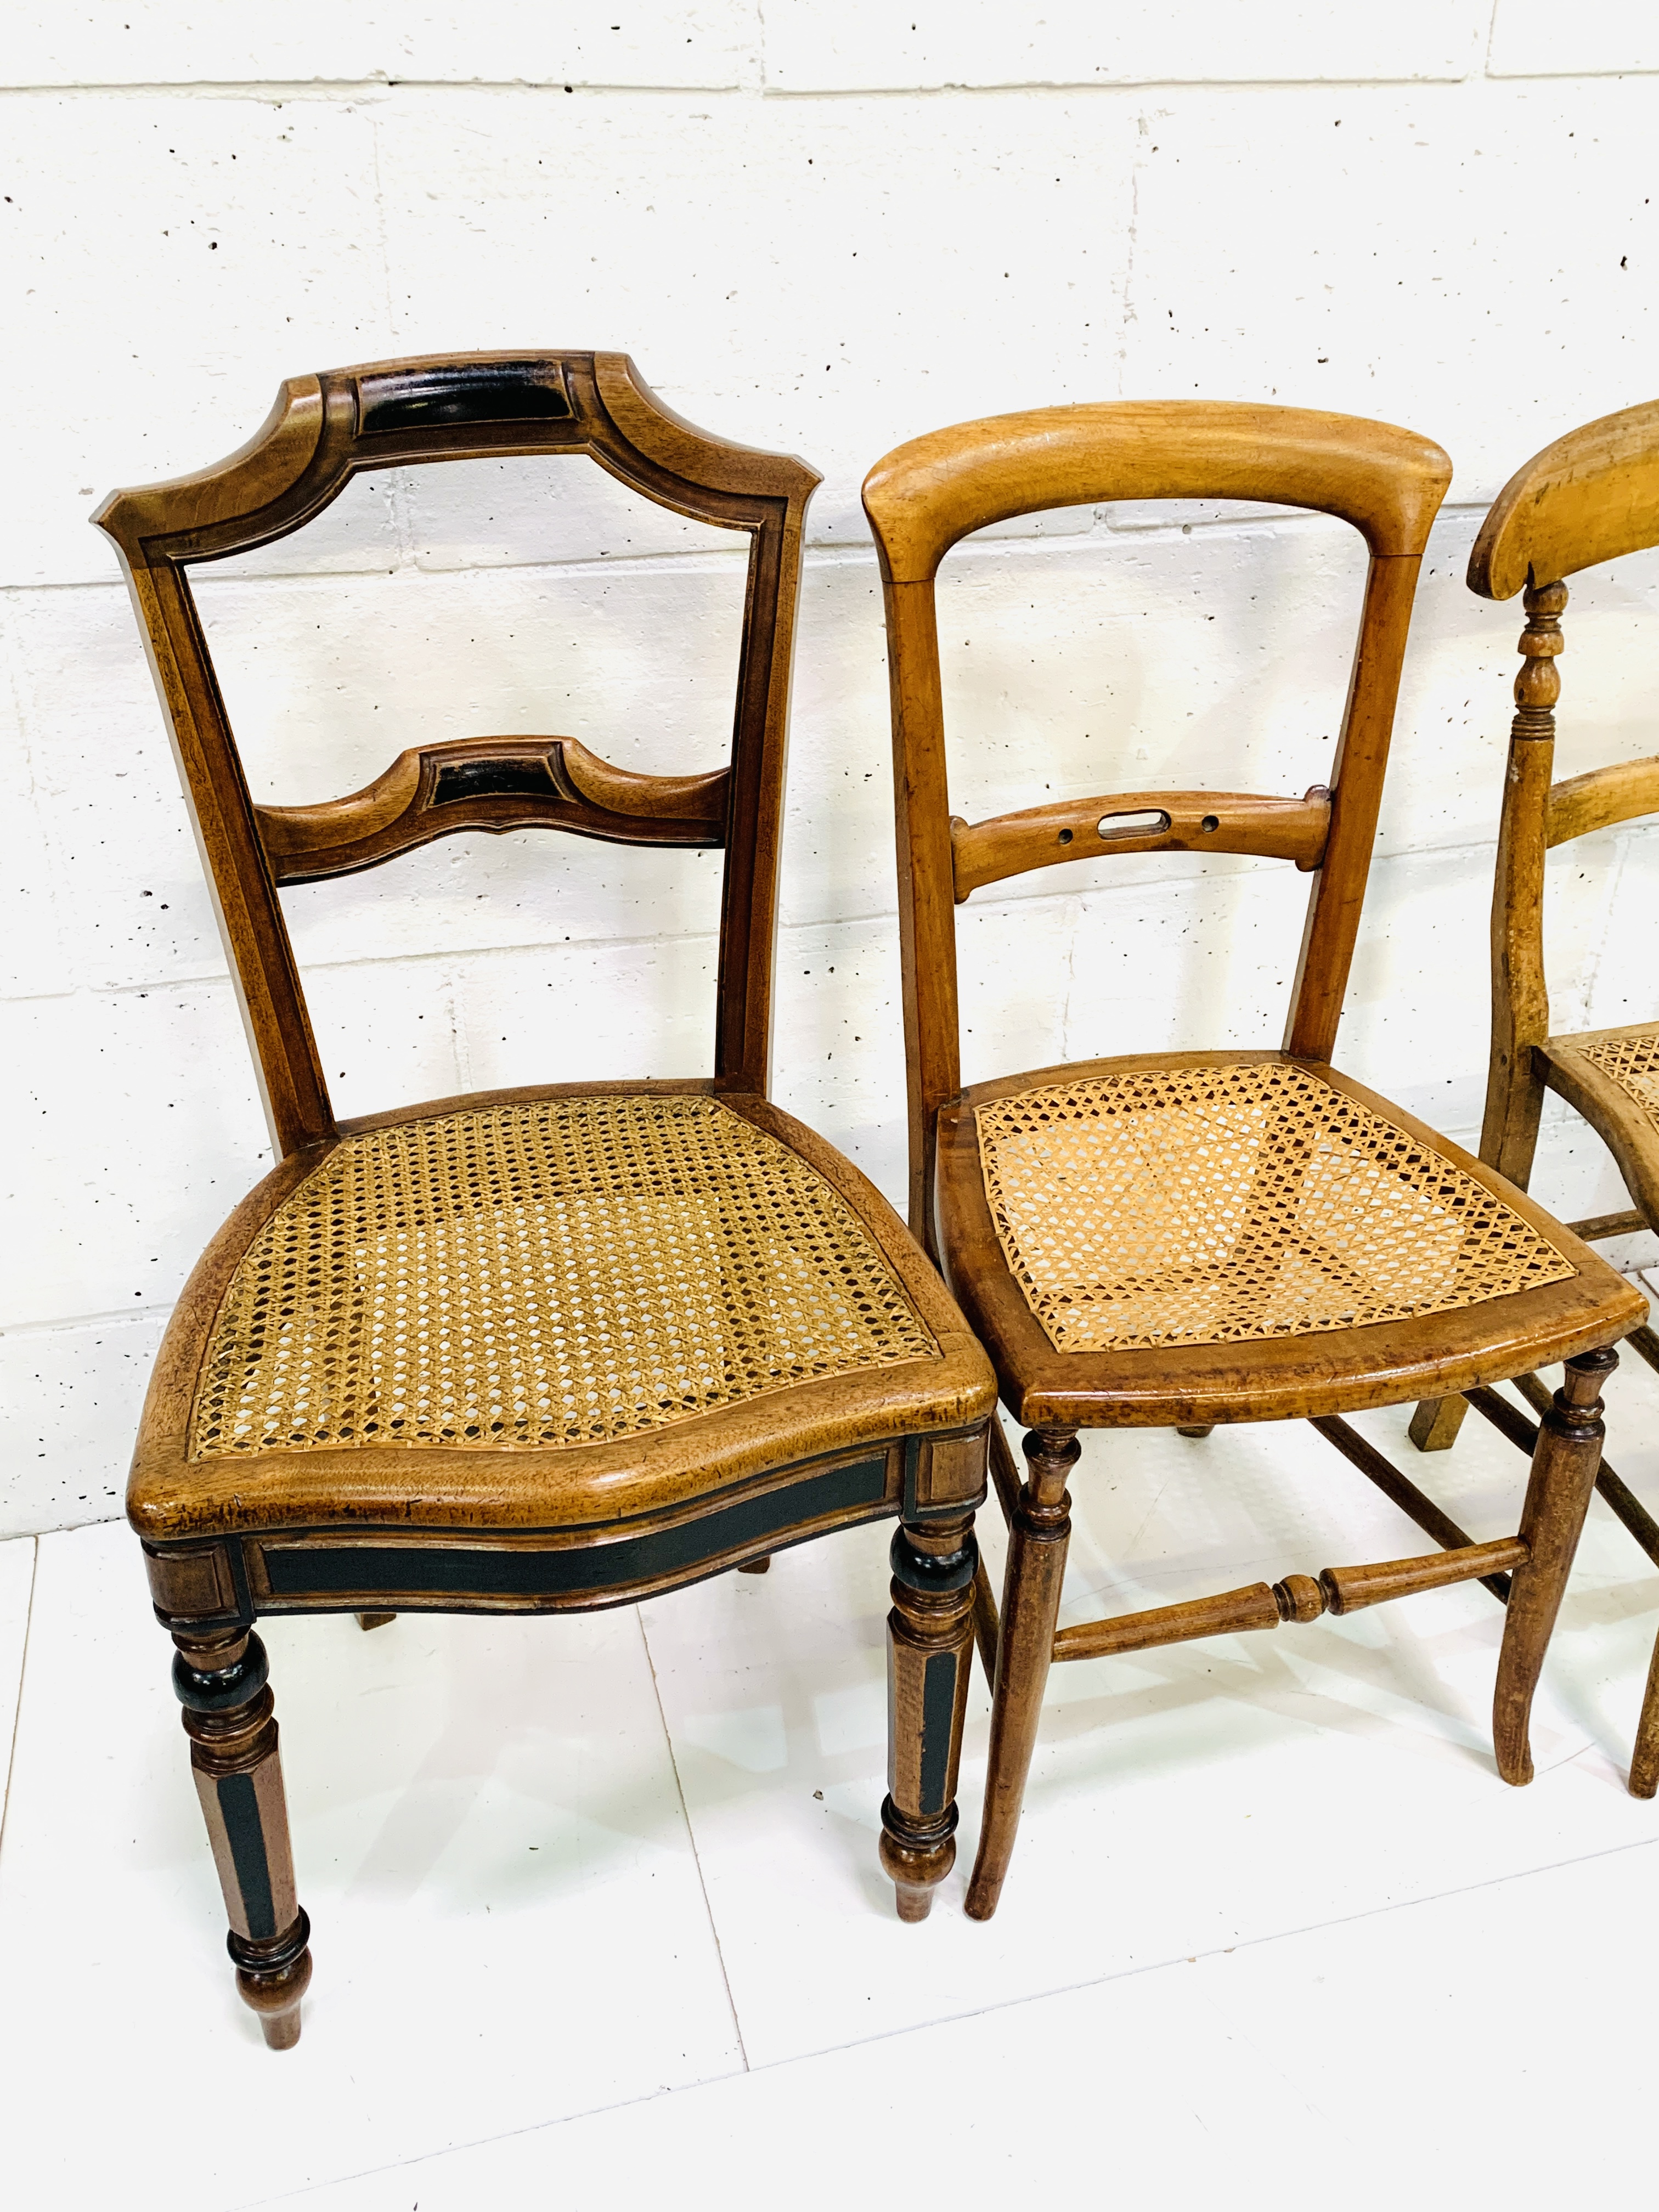 Four individual cane seat chairs